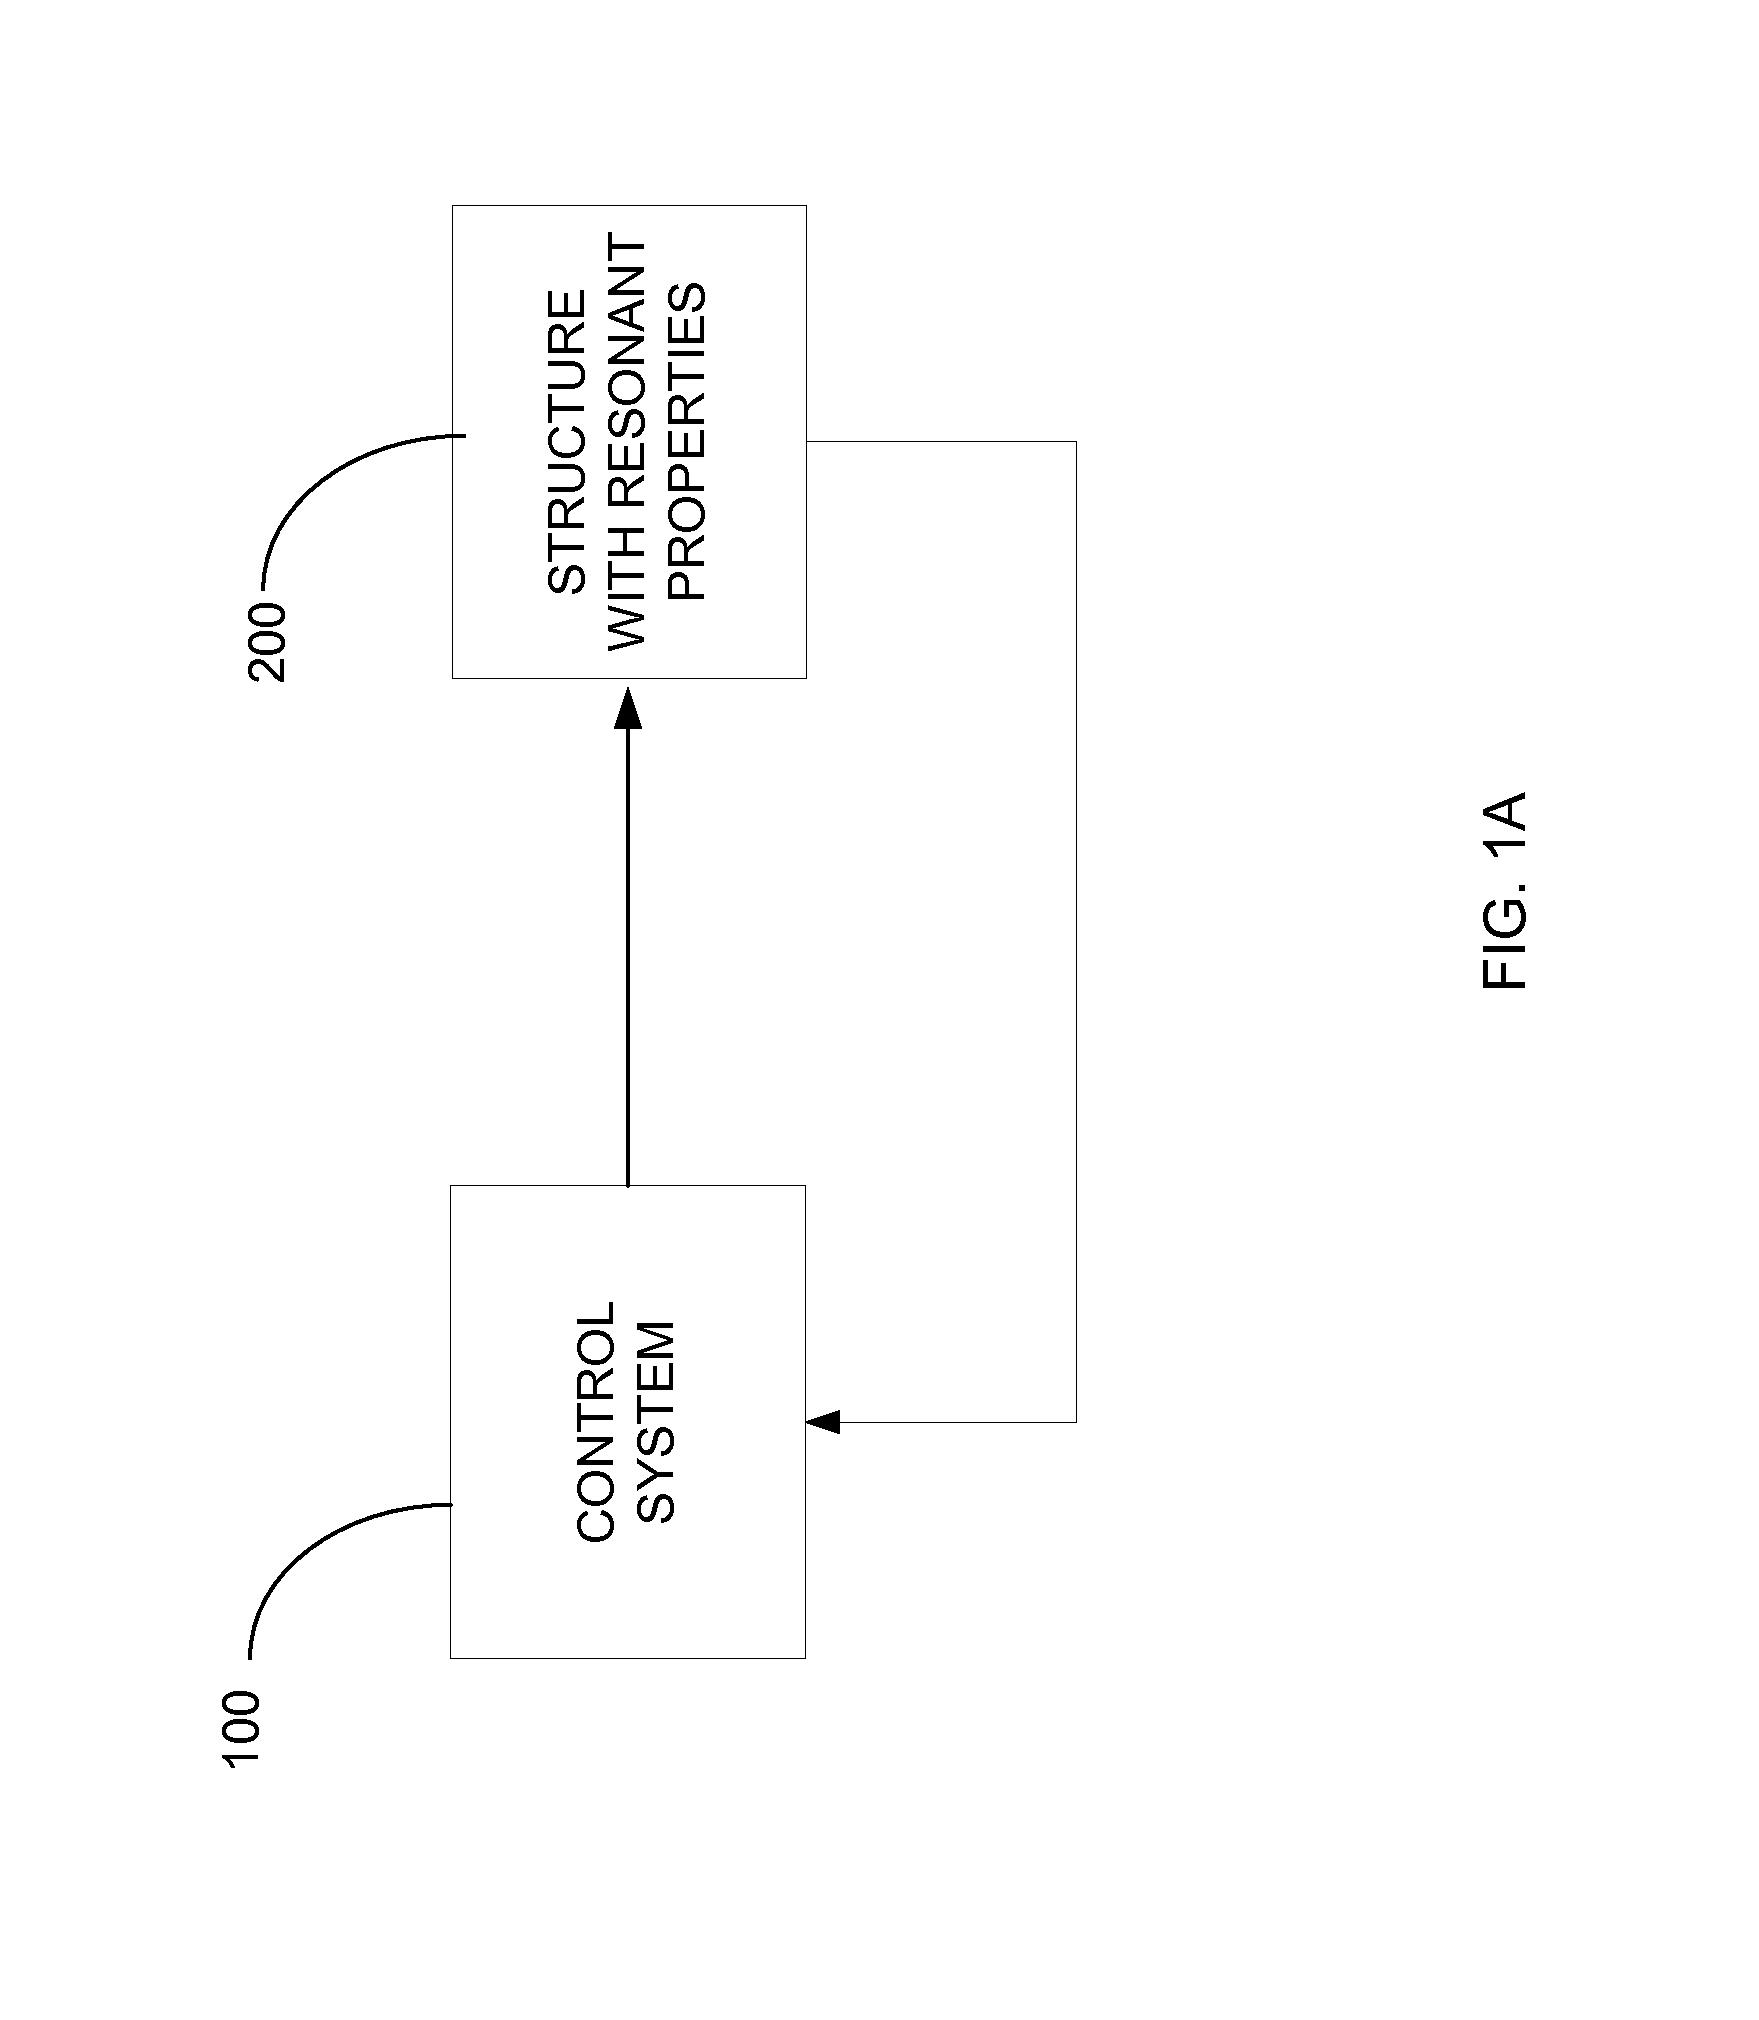 Dynamically detecting resonating frequencies of resonating structures